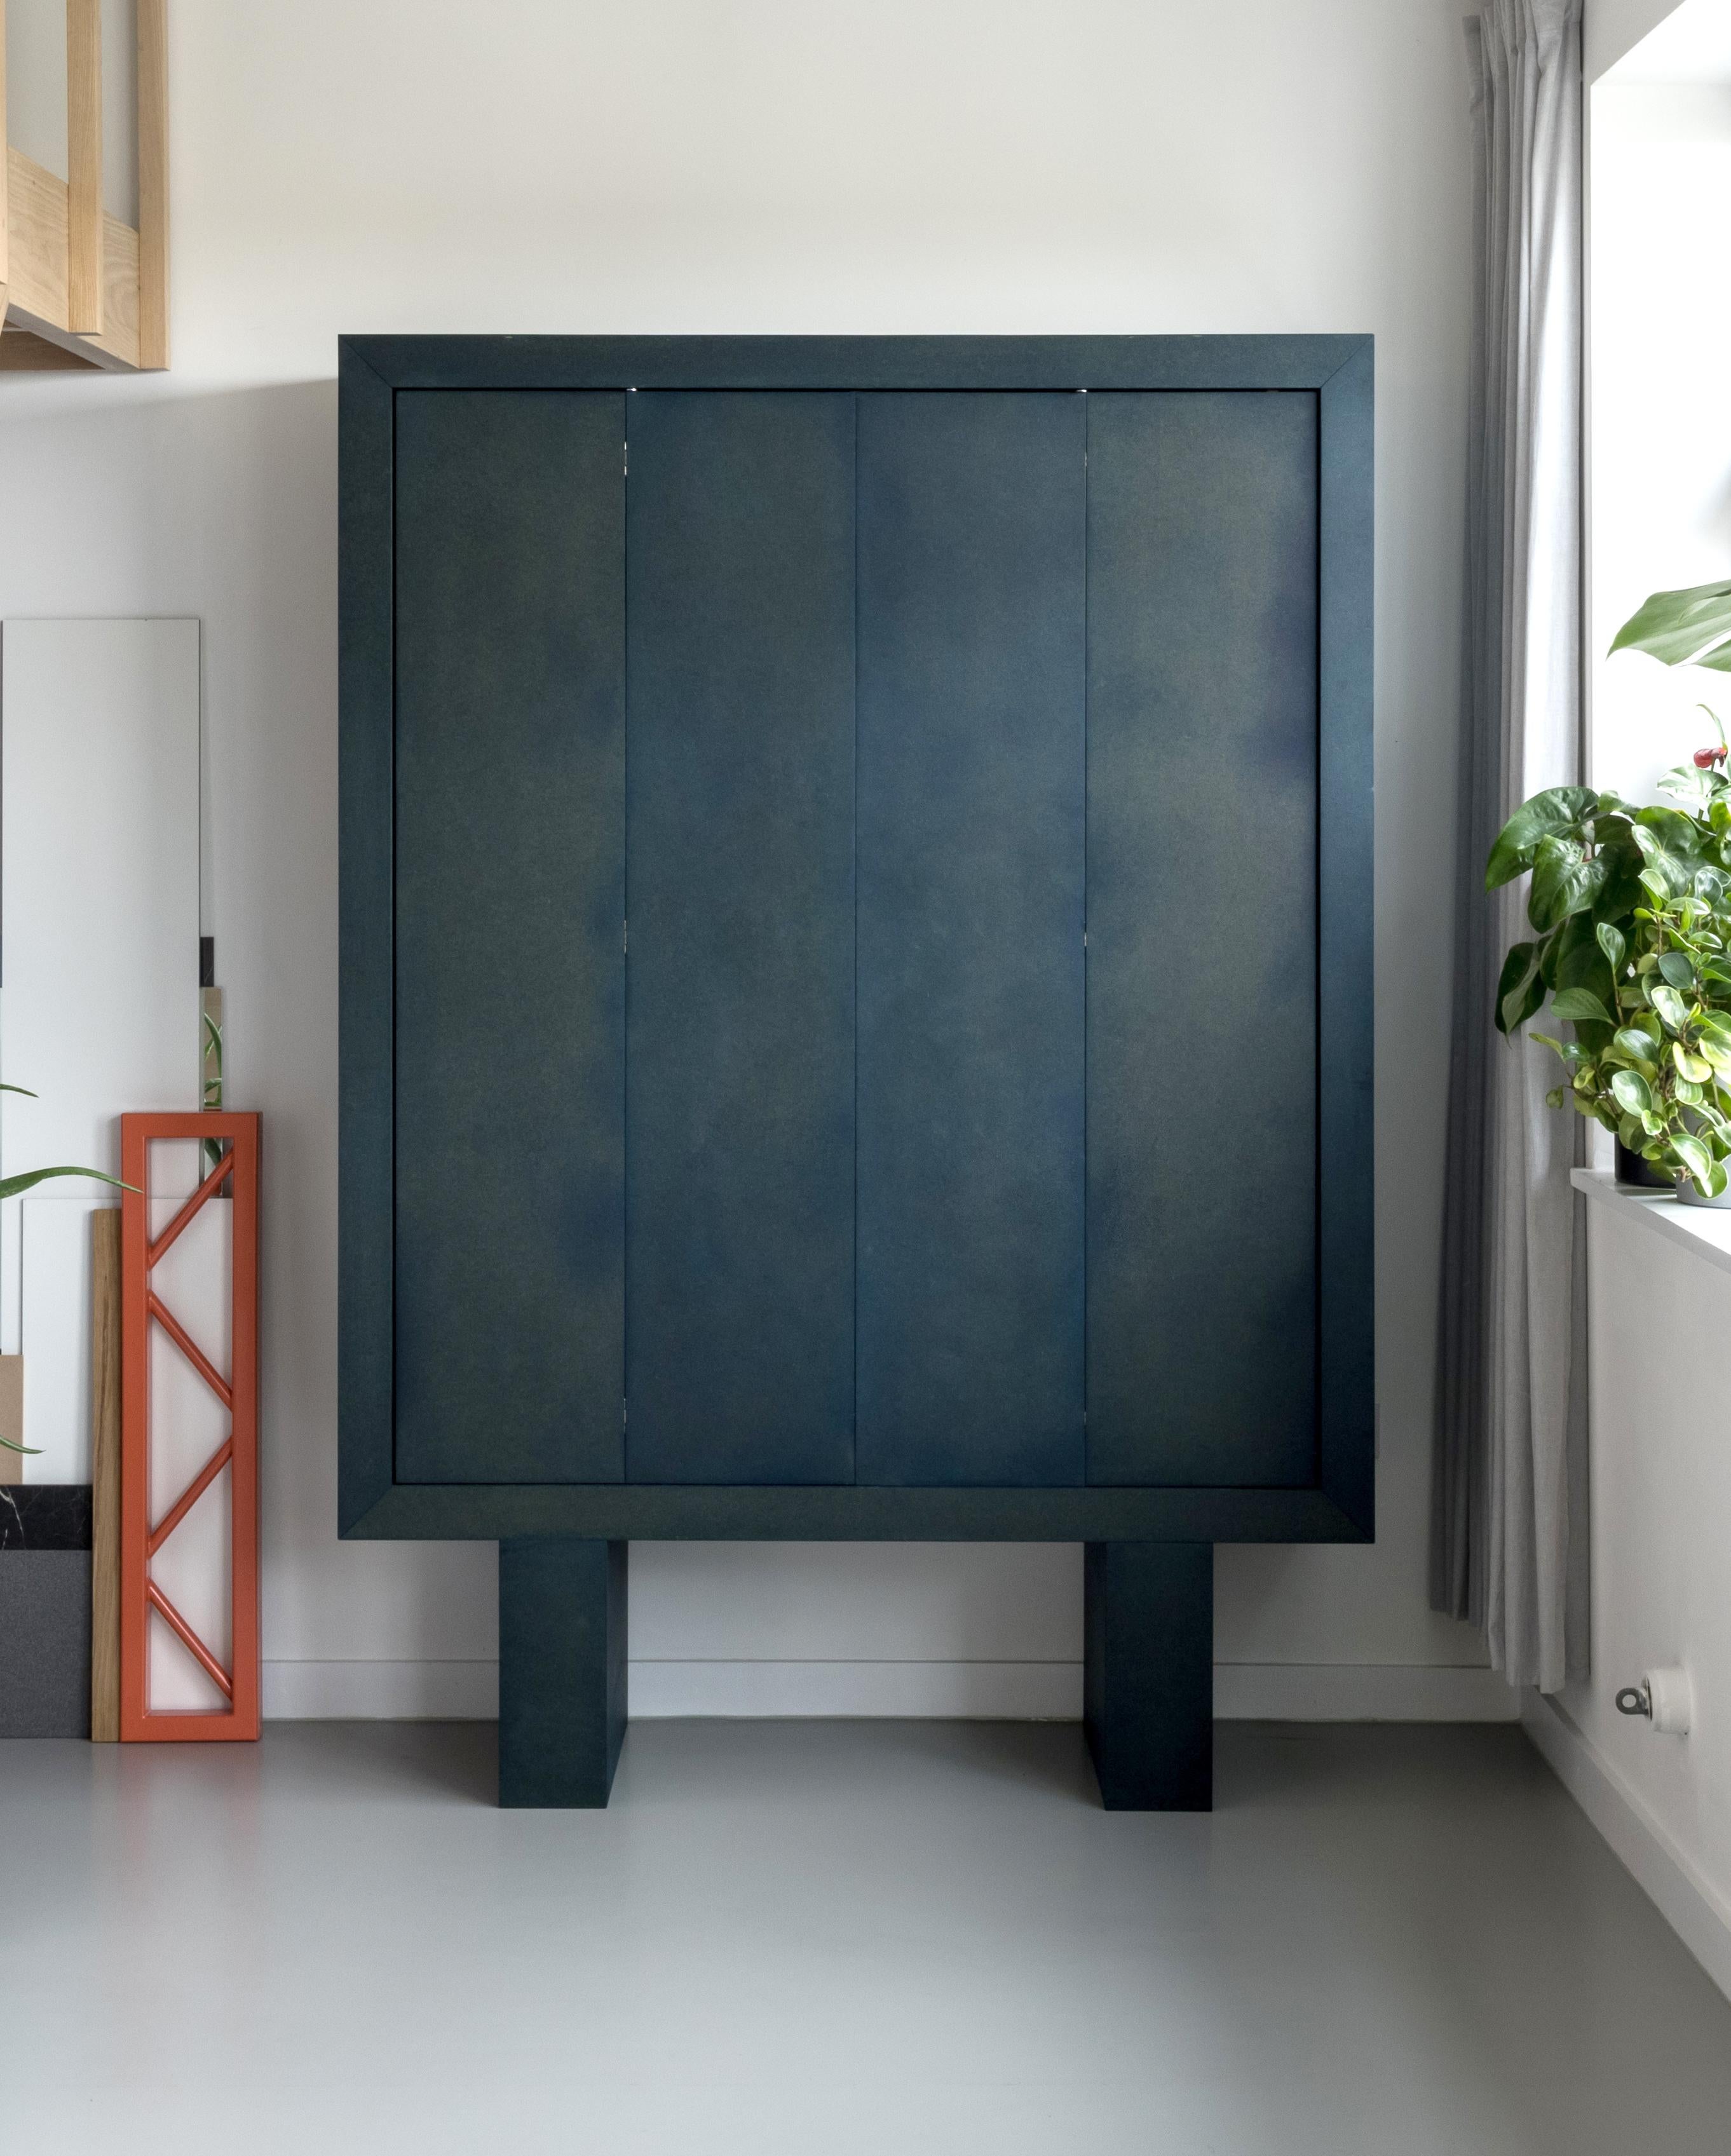 The 'Monolithic' storage unit was initially designed for the designer James Stickley himself as a storage unit and work bench for his home studio. It is a stunning graphic minimal piece.

The piece is designed to be a monolithic block with a